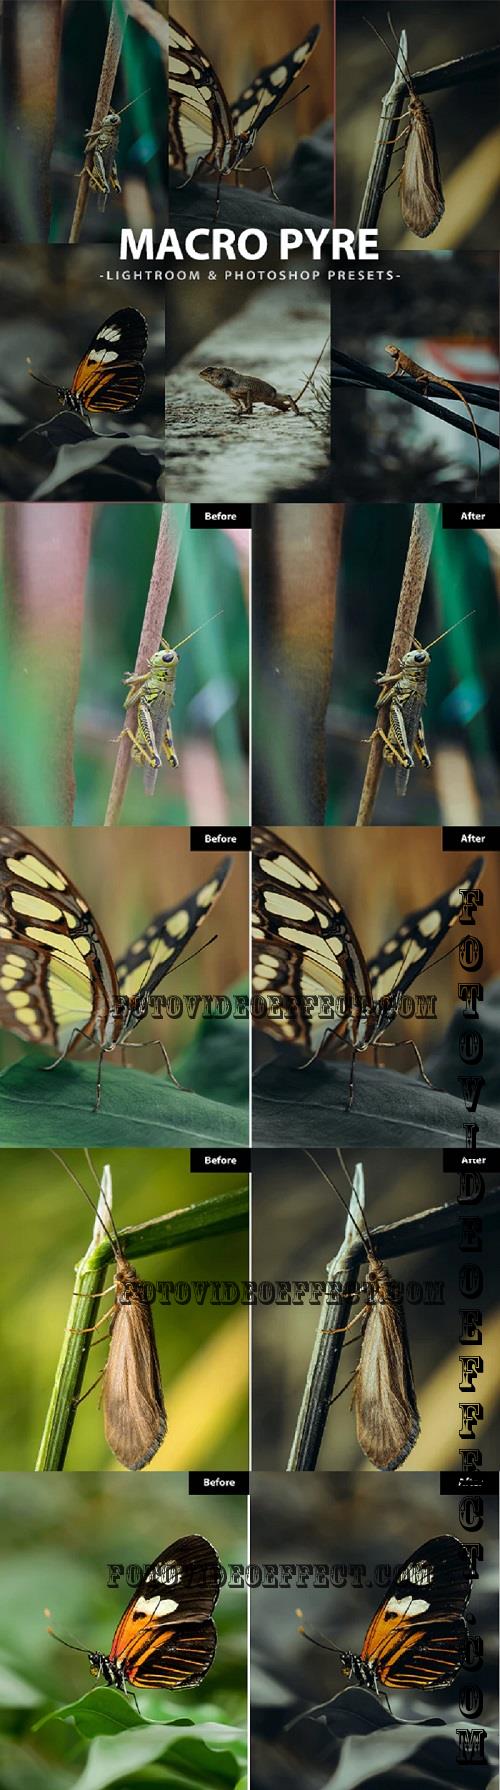 6 Macro Pyre Lightroom and Photoshop Presets - 46543010